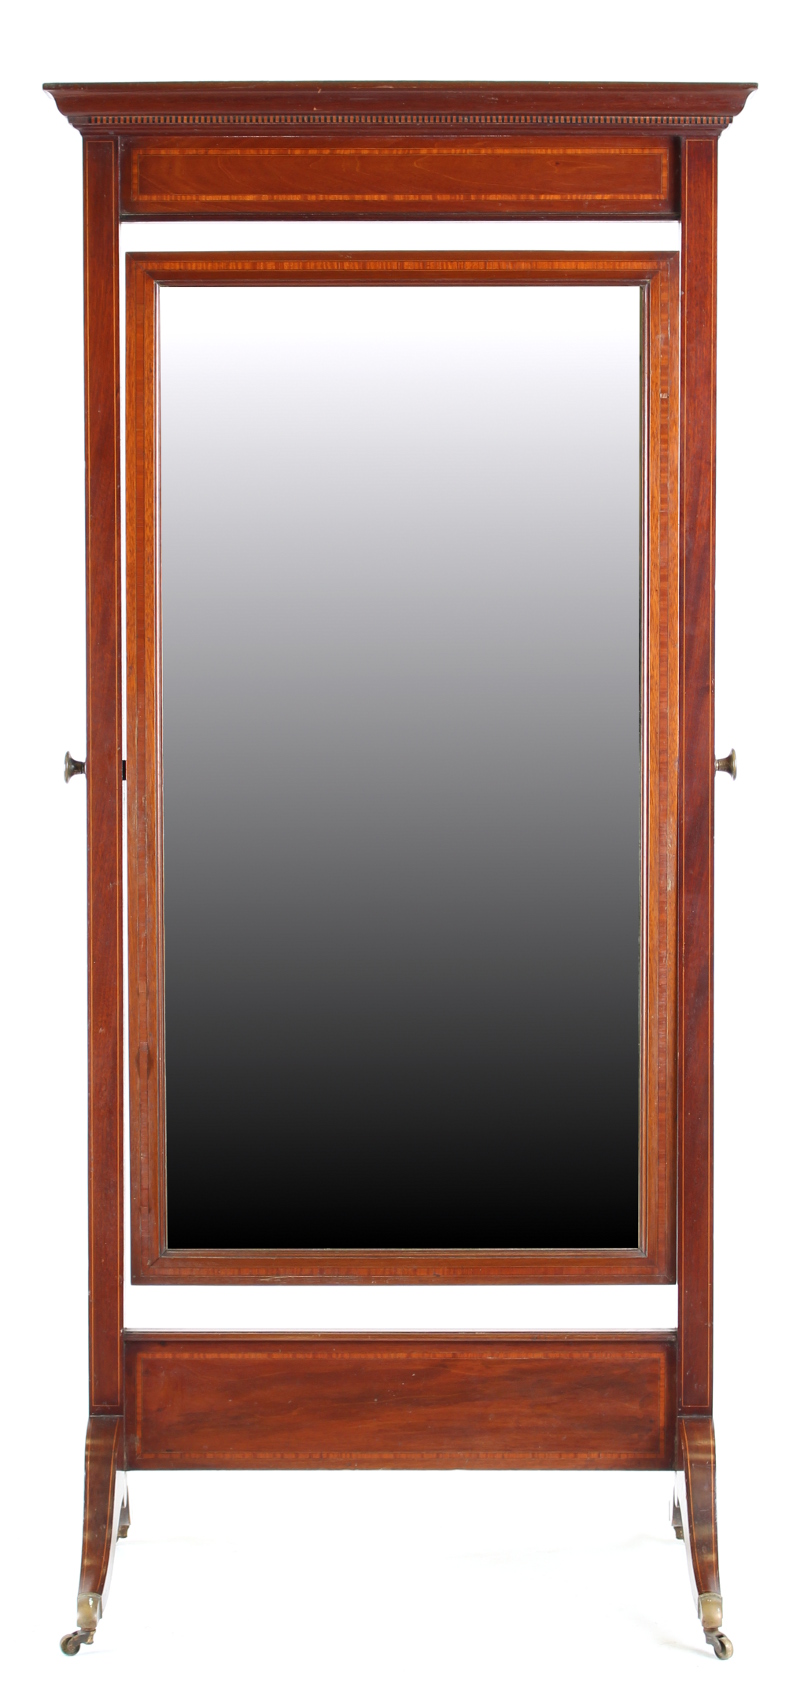 Property of a deceased estate - an Edwardian mahogany & satinwood banded cheval mirror, with